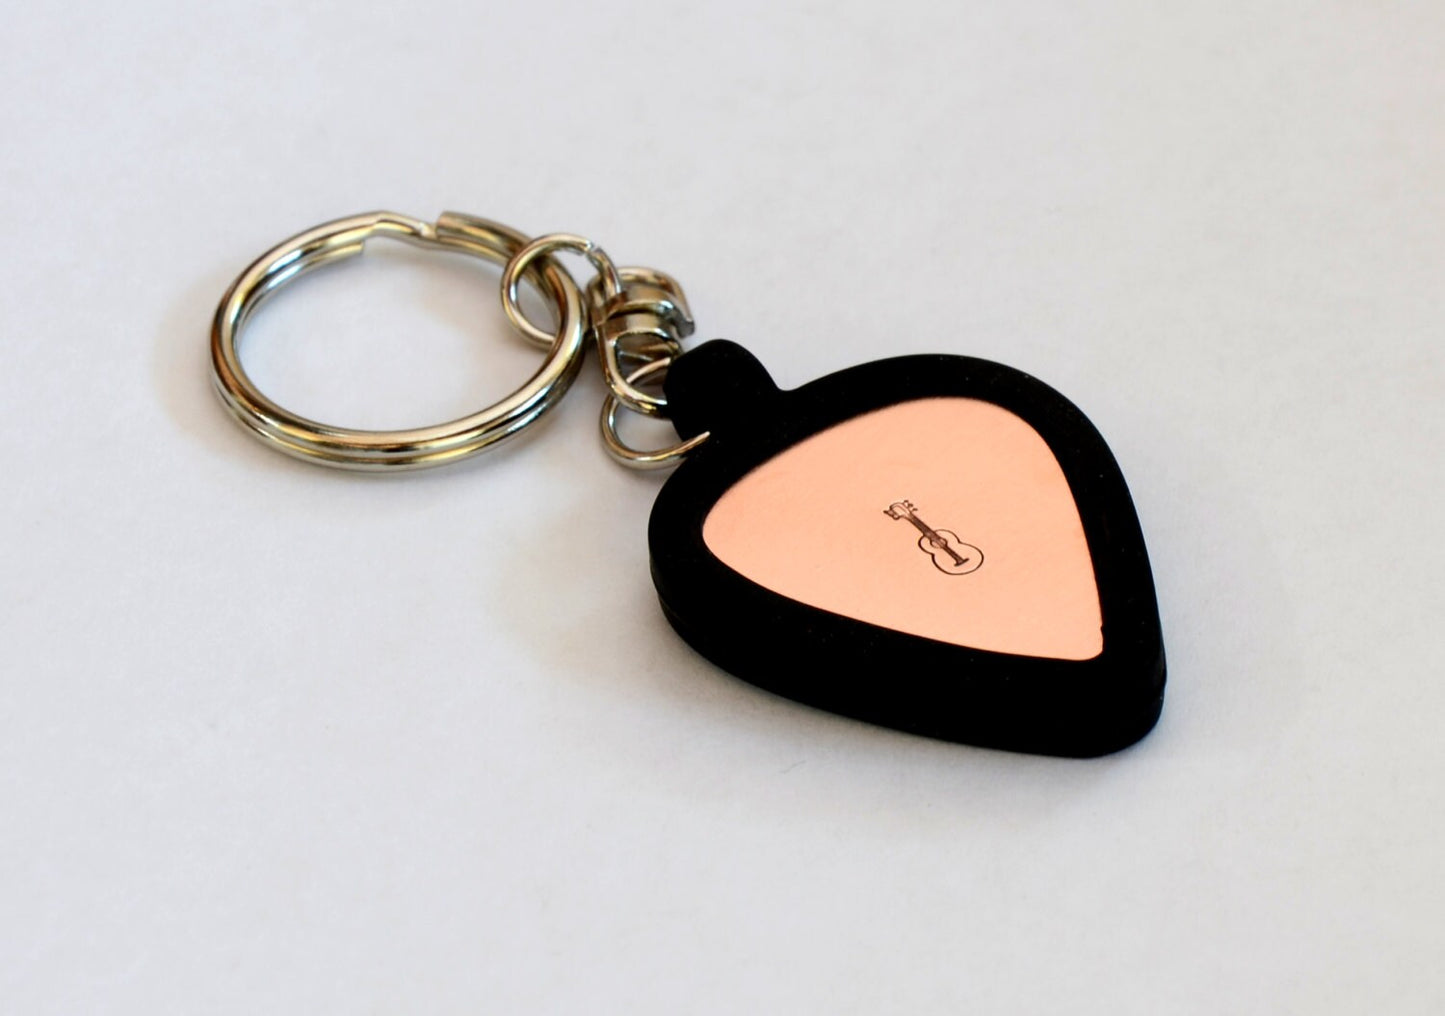 Personalized Guitar Pick Keychain with Holder